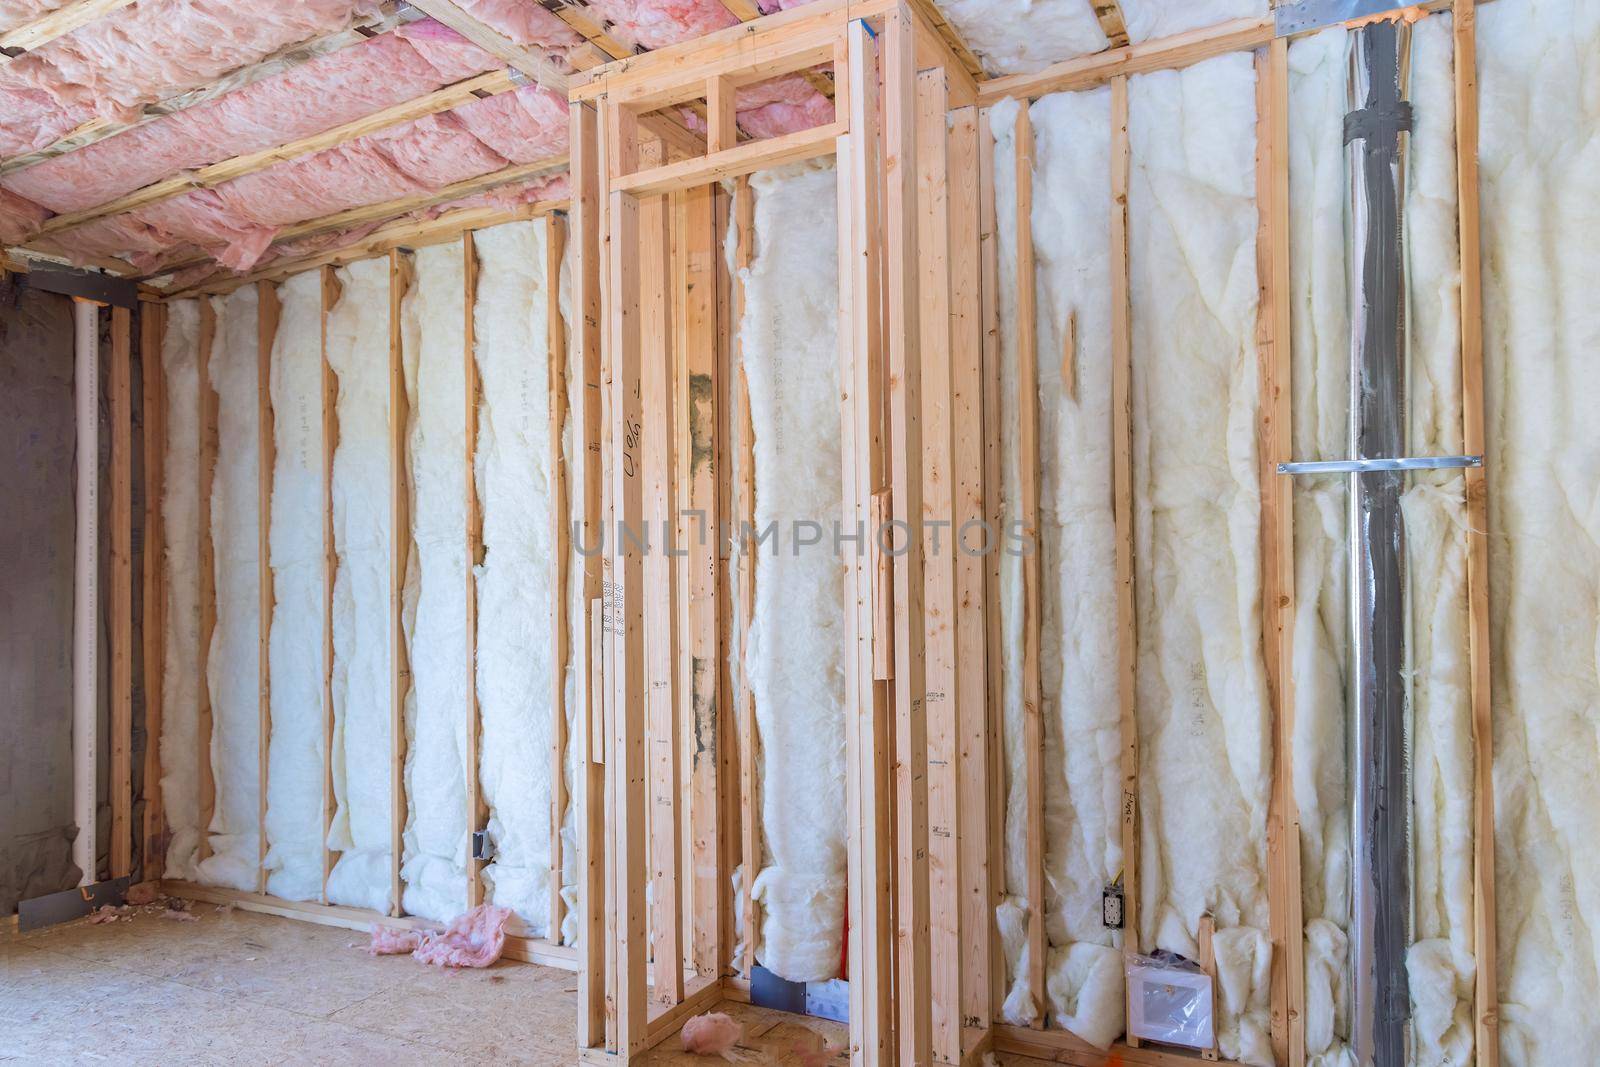 Wooden frame walls with insulated with rock wool fiberglass insulation for cold barrier by ungvar